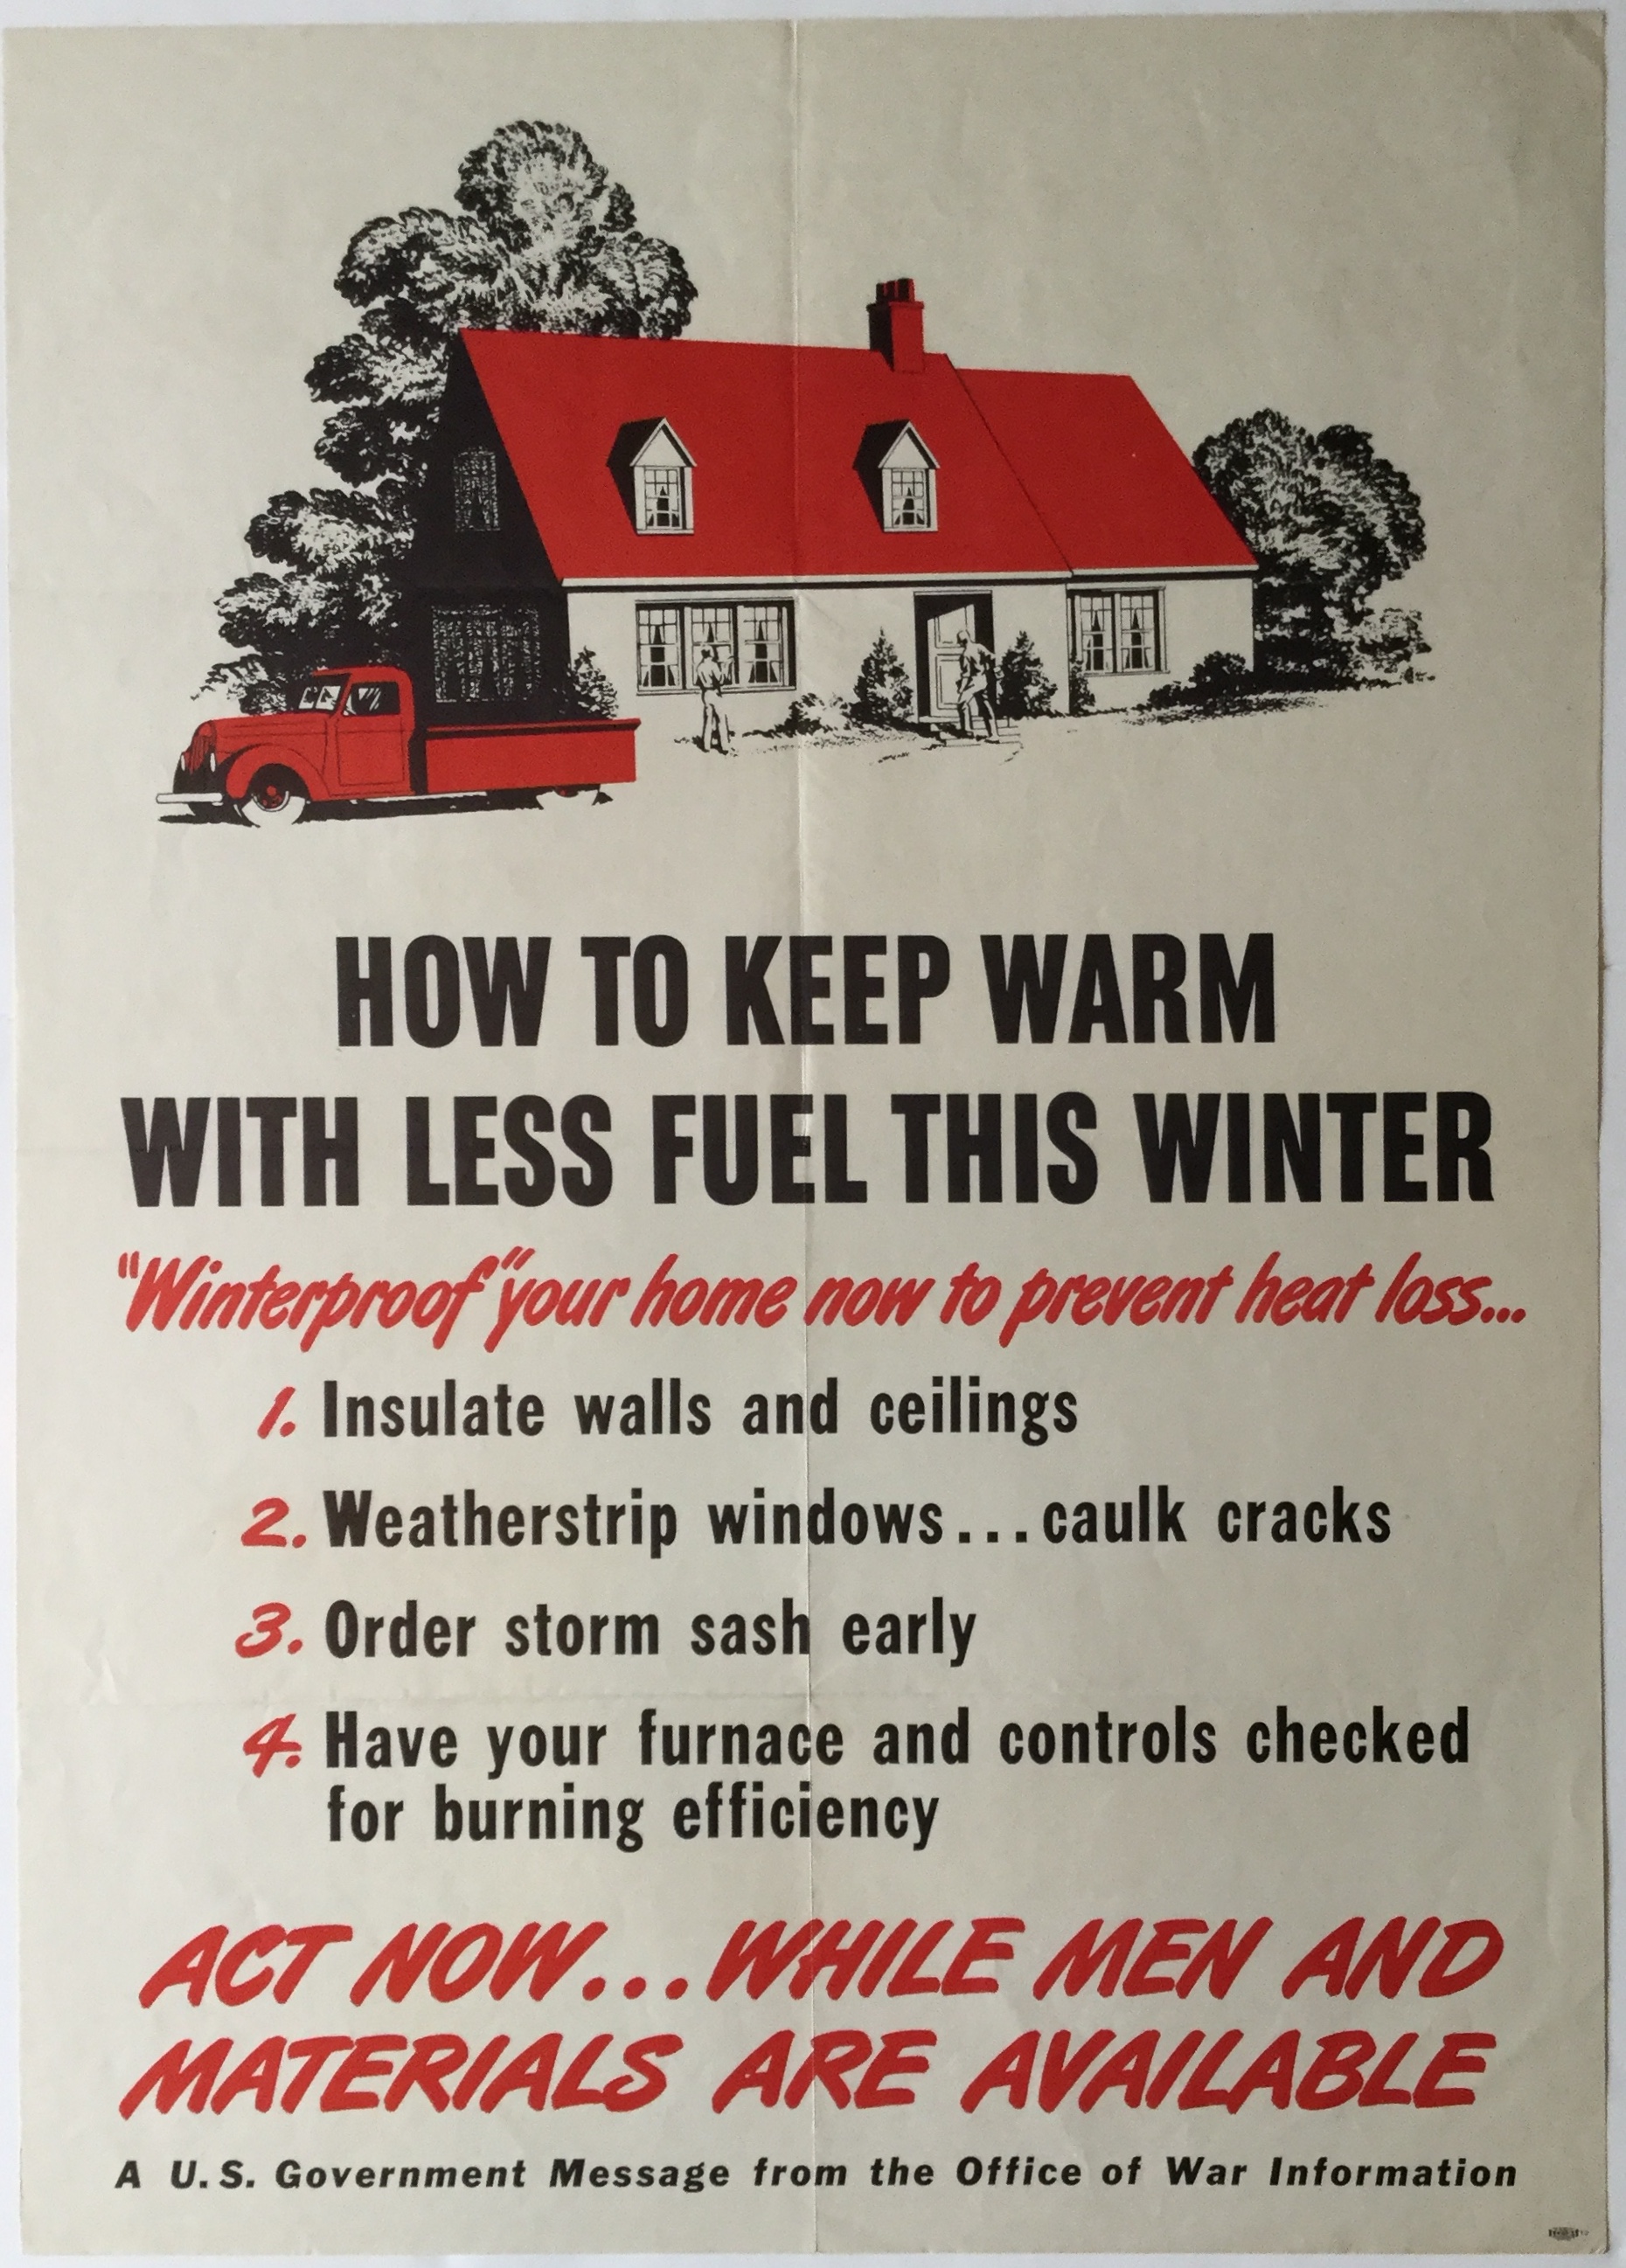 P1084 HOW TO KEEP WARM WITH LESS FUEL